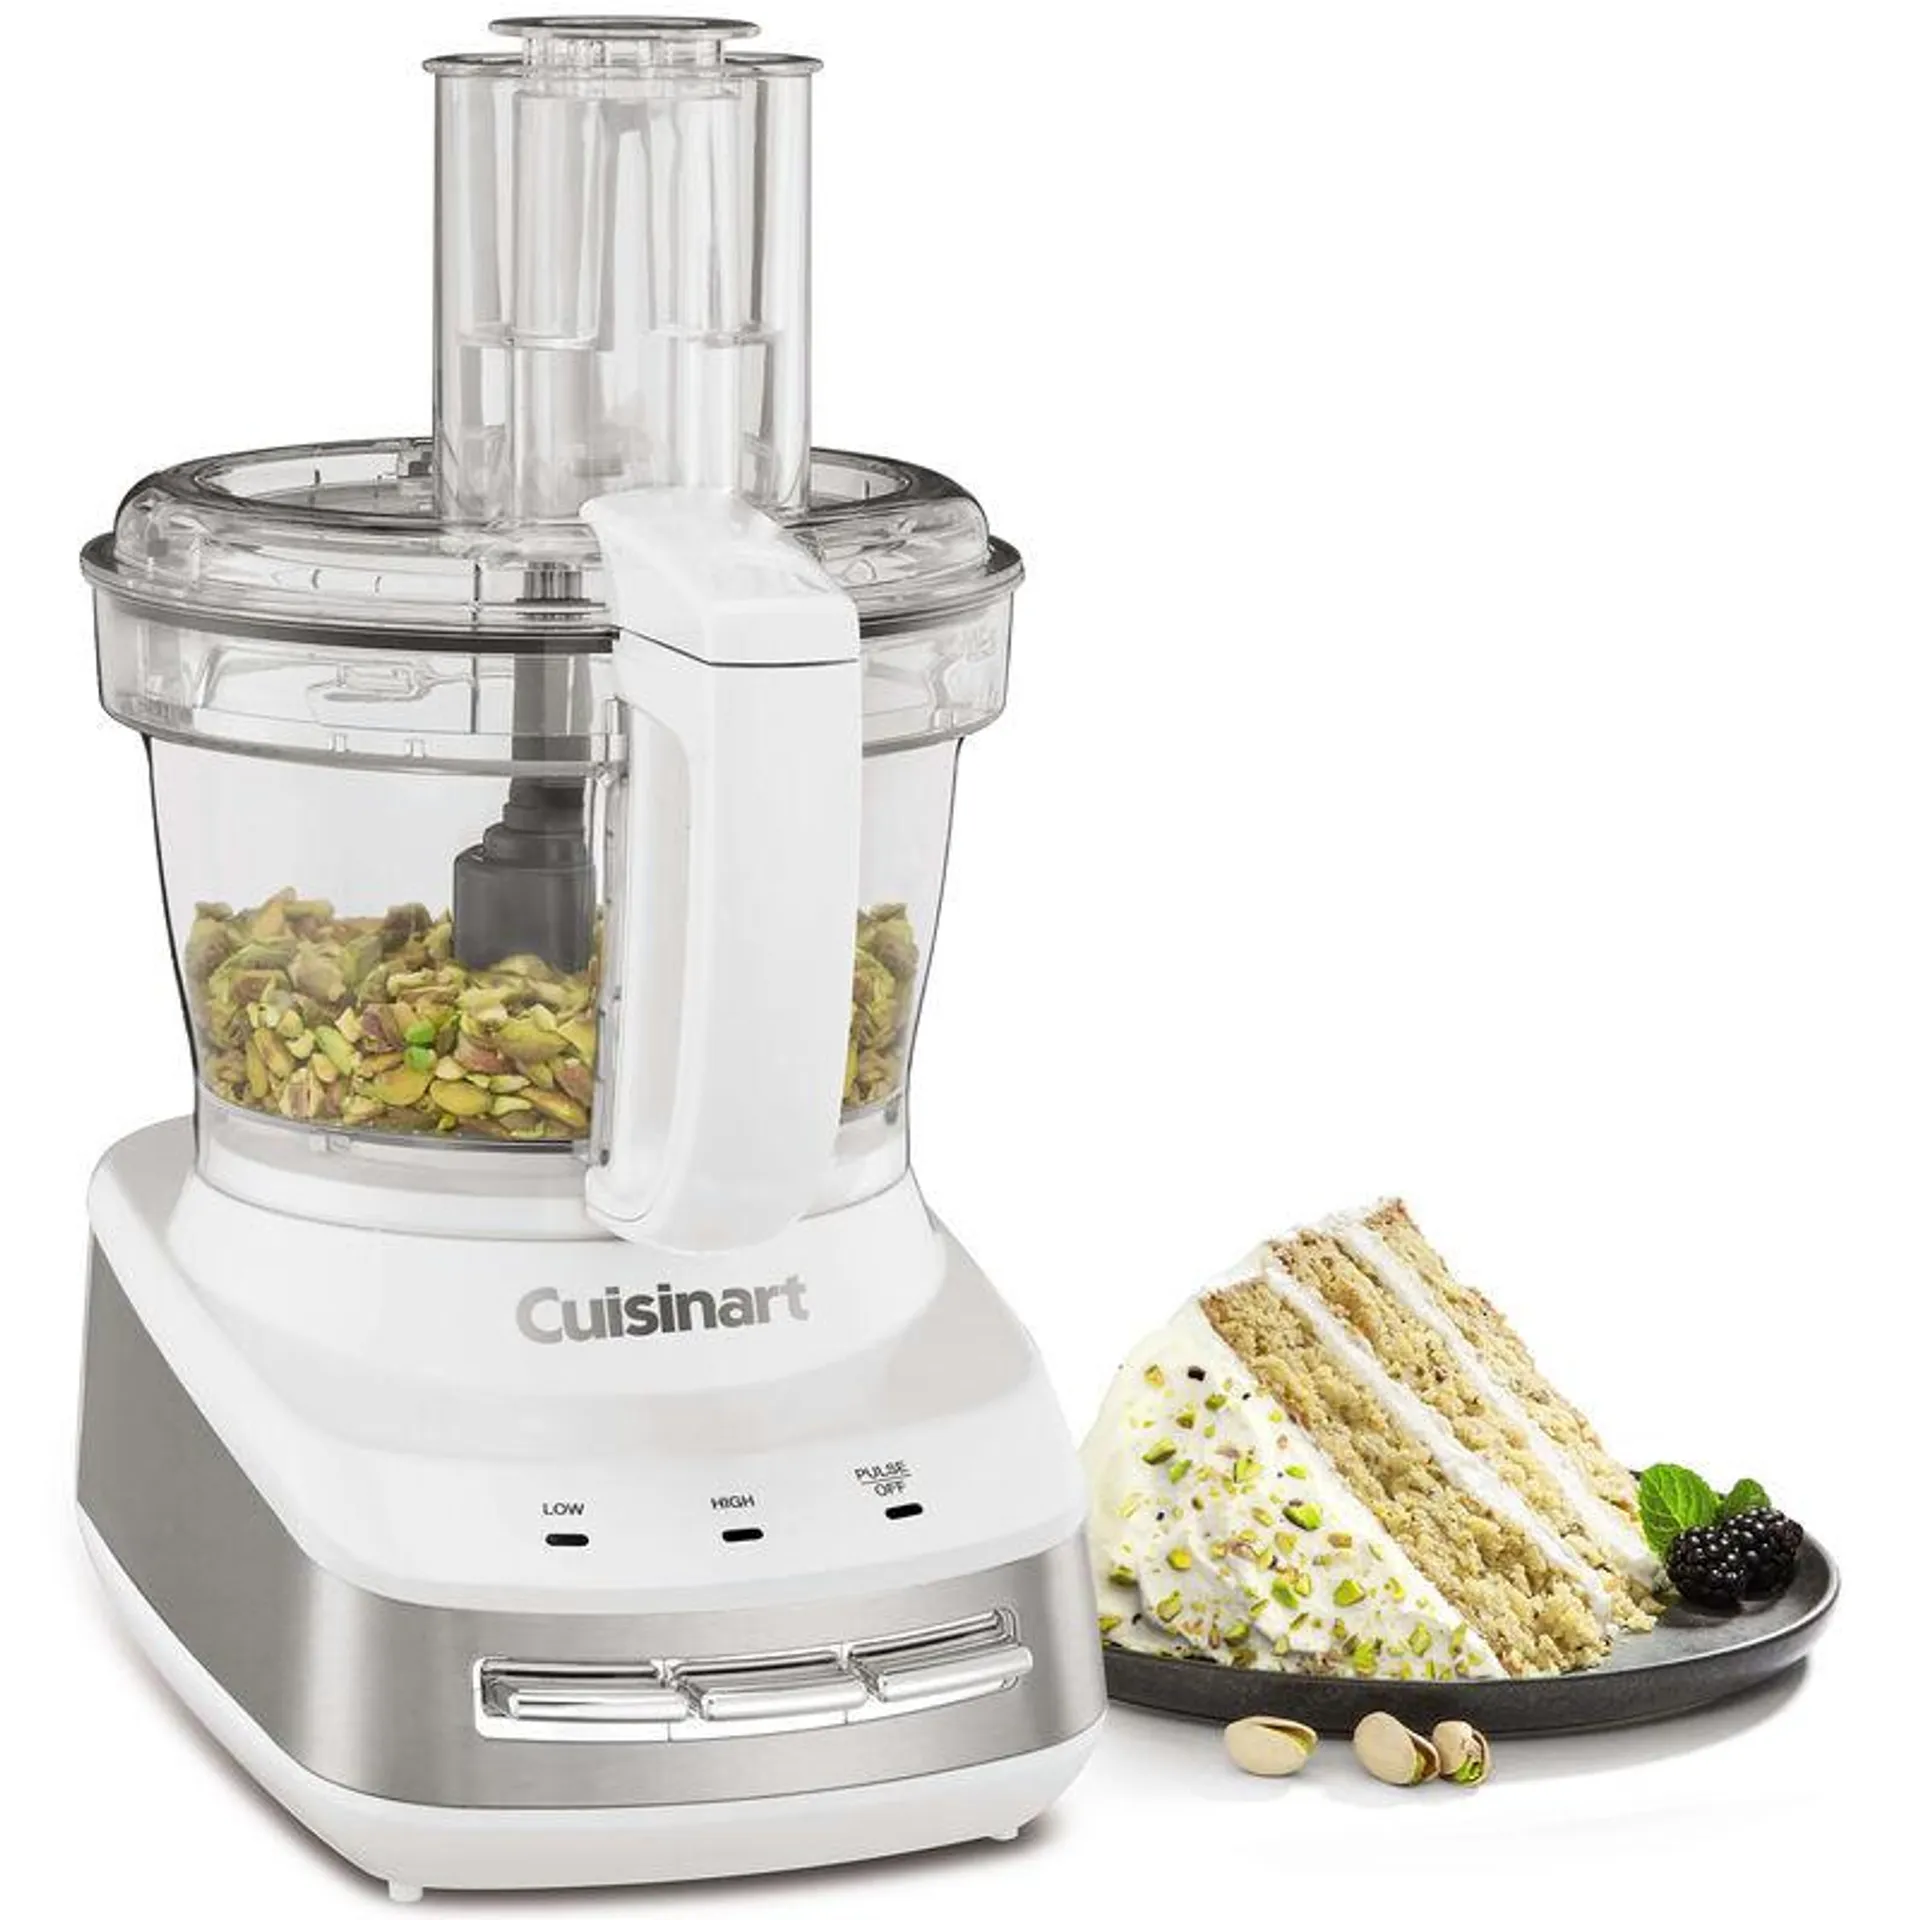 Cuisinart Core Custom 10-Cup Food Processor - White & Stainless